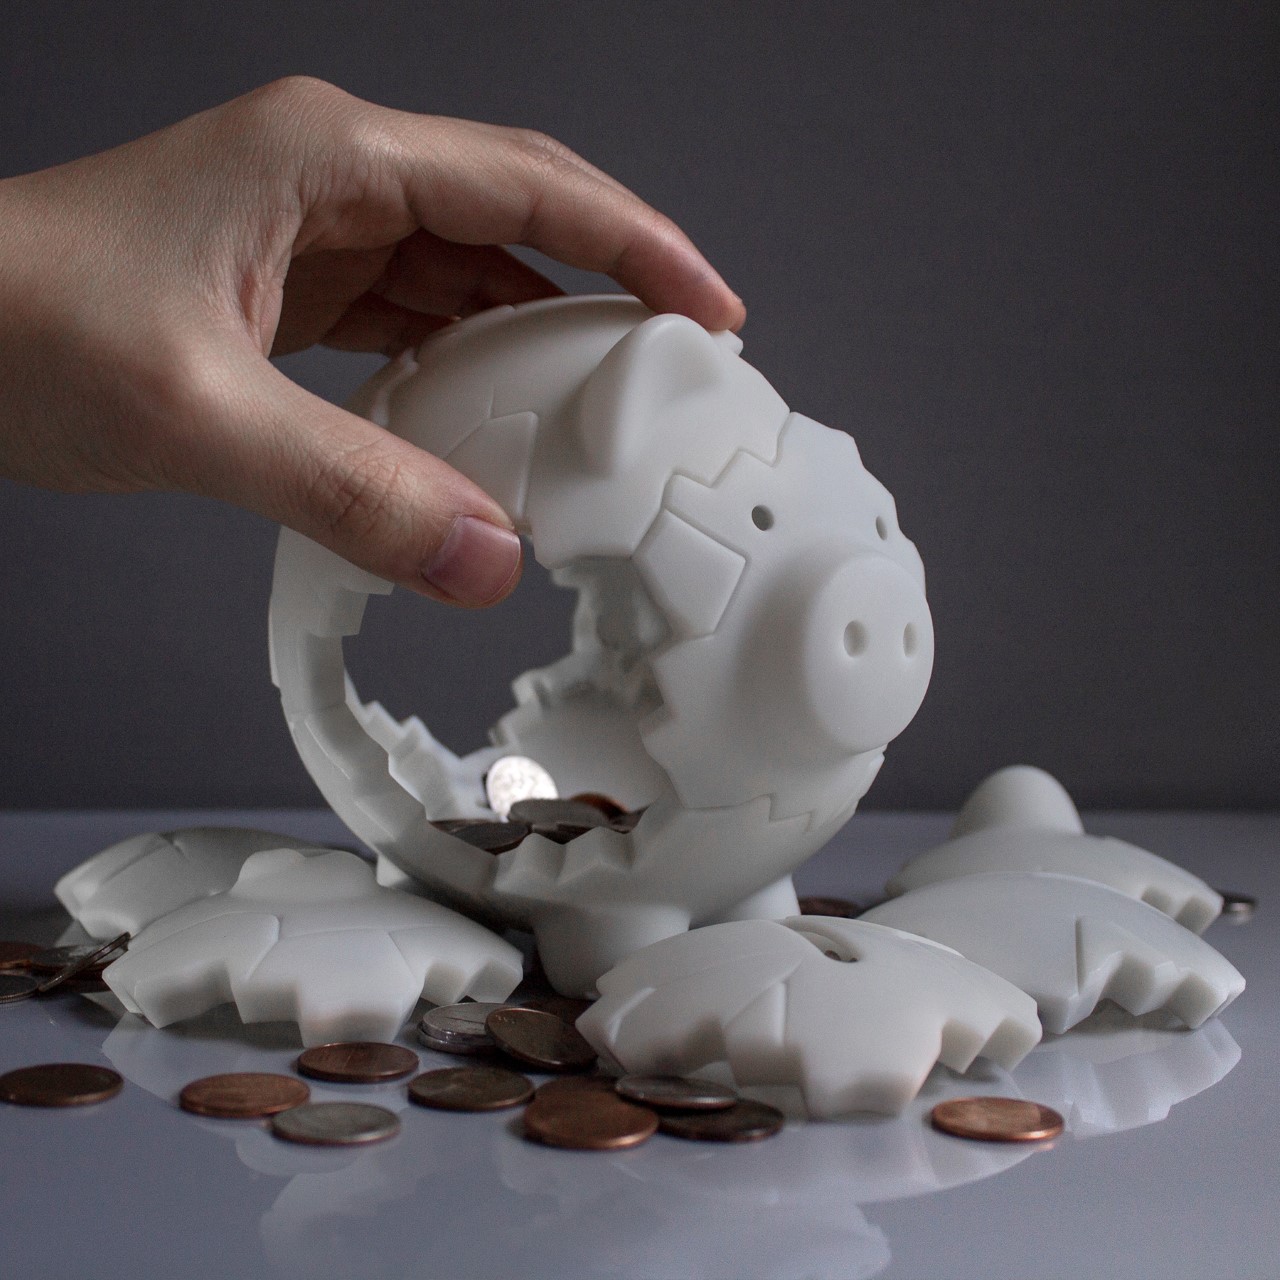 Magnetic Piggy Bank reassembles itself after being broken, becoming a  circular fidget-toy in the process - Yanko Design